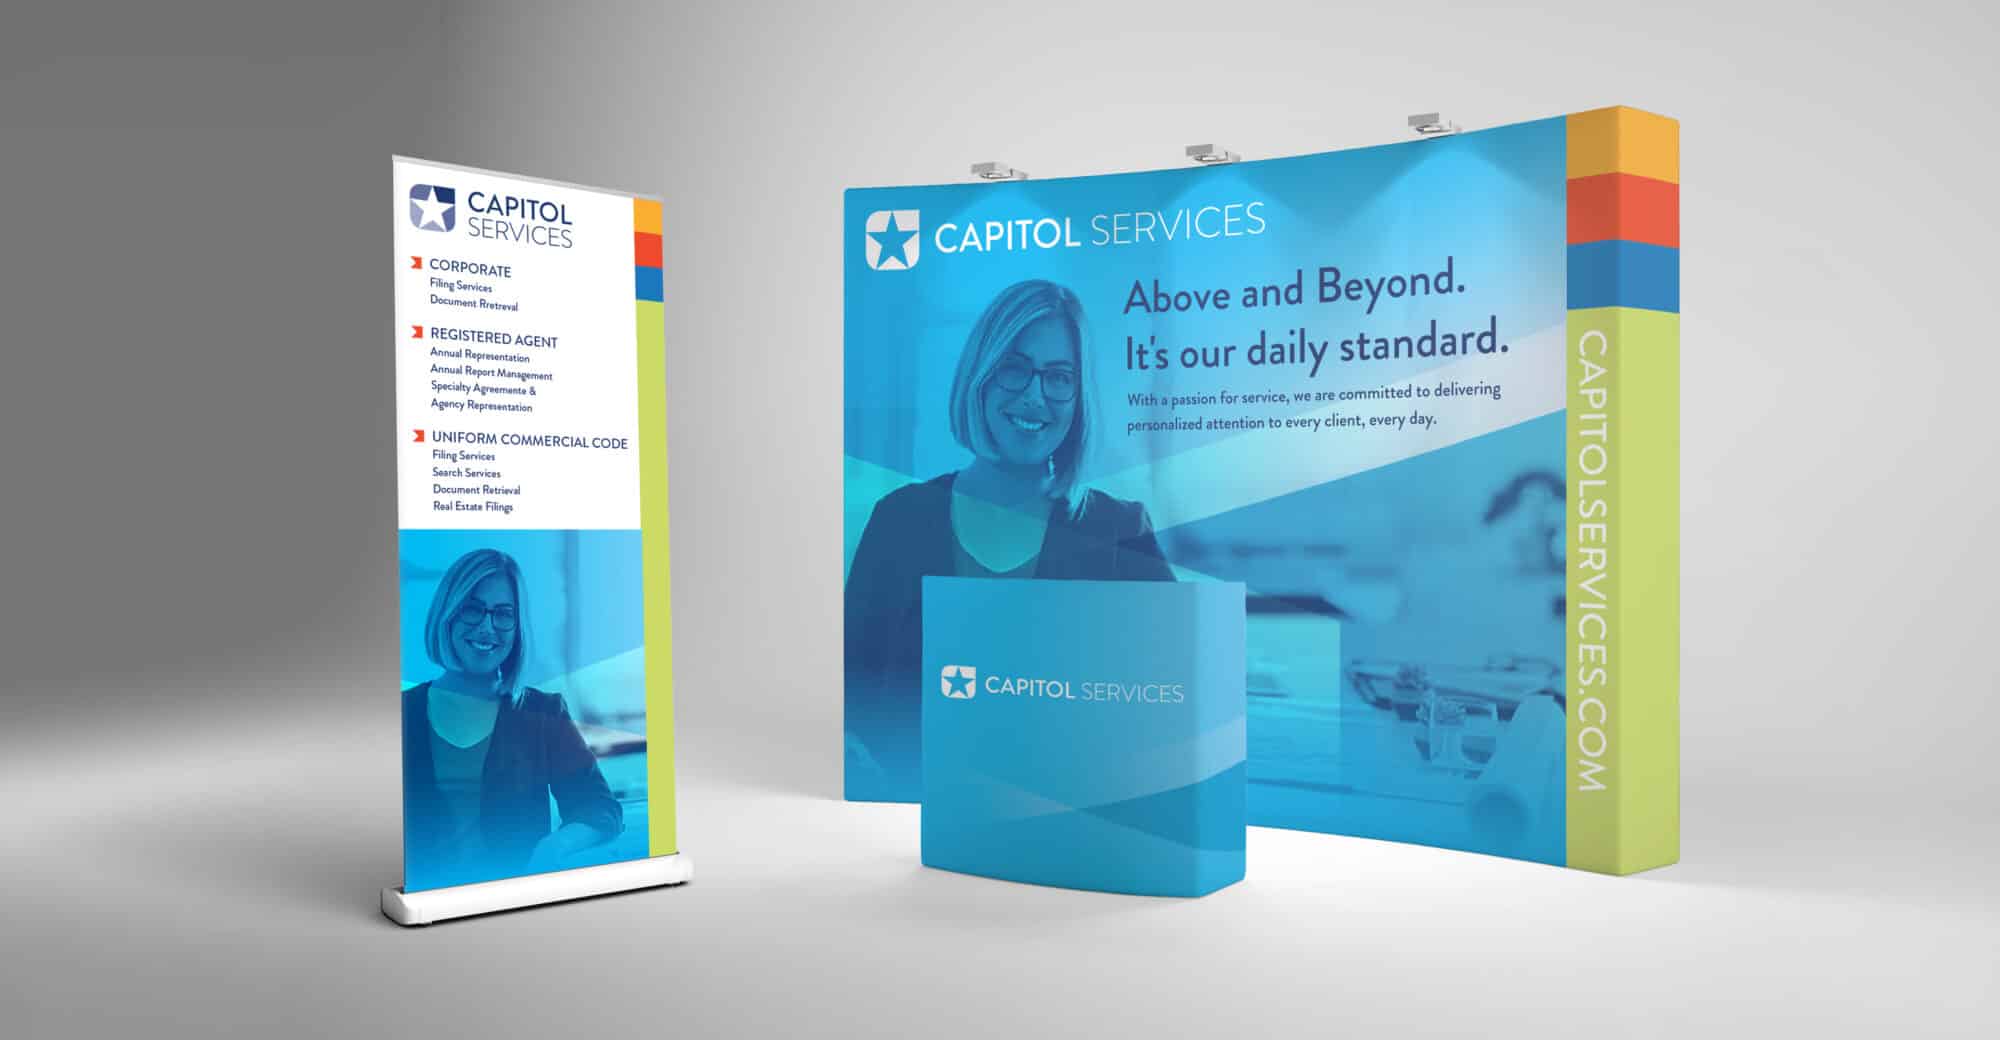 A Capitol Services trade show booth design.